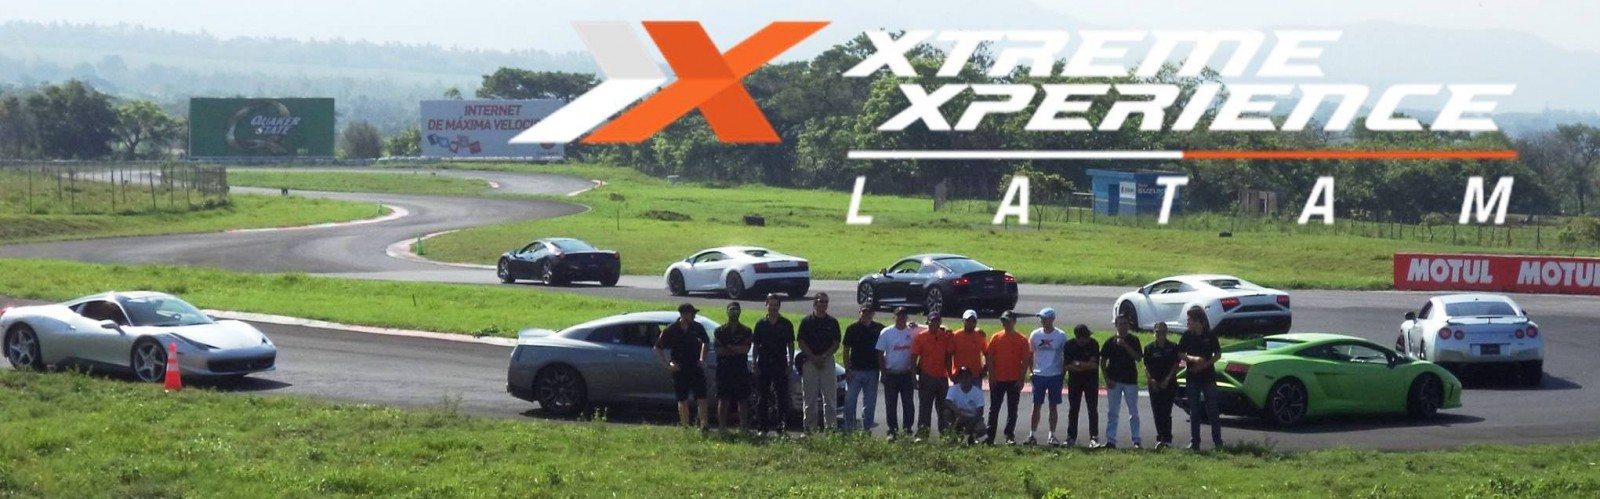 image of xtreme xperience latam at guatemala's circuit year review